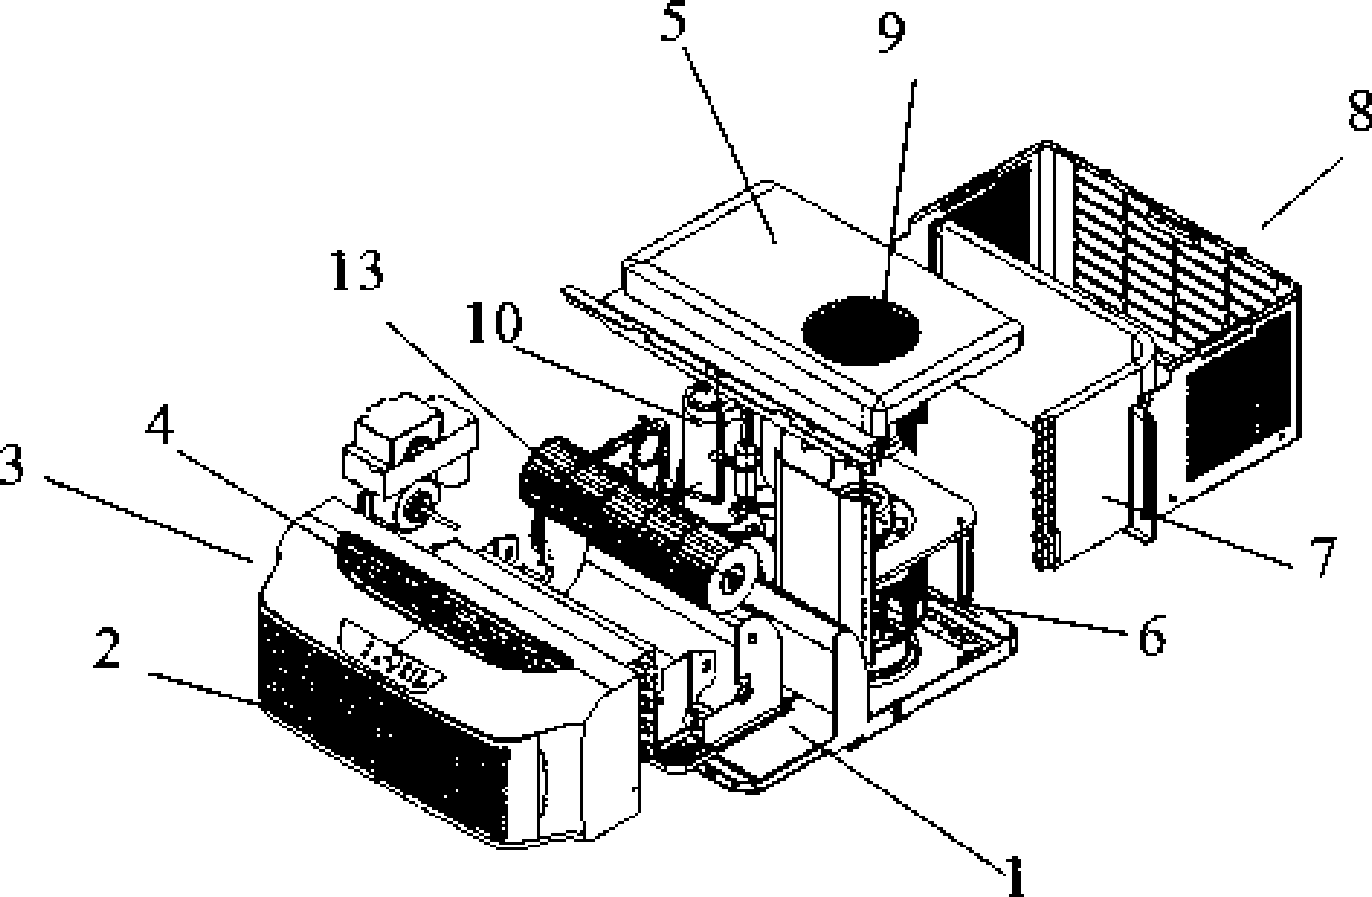 Air intake structure of window air conditioner